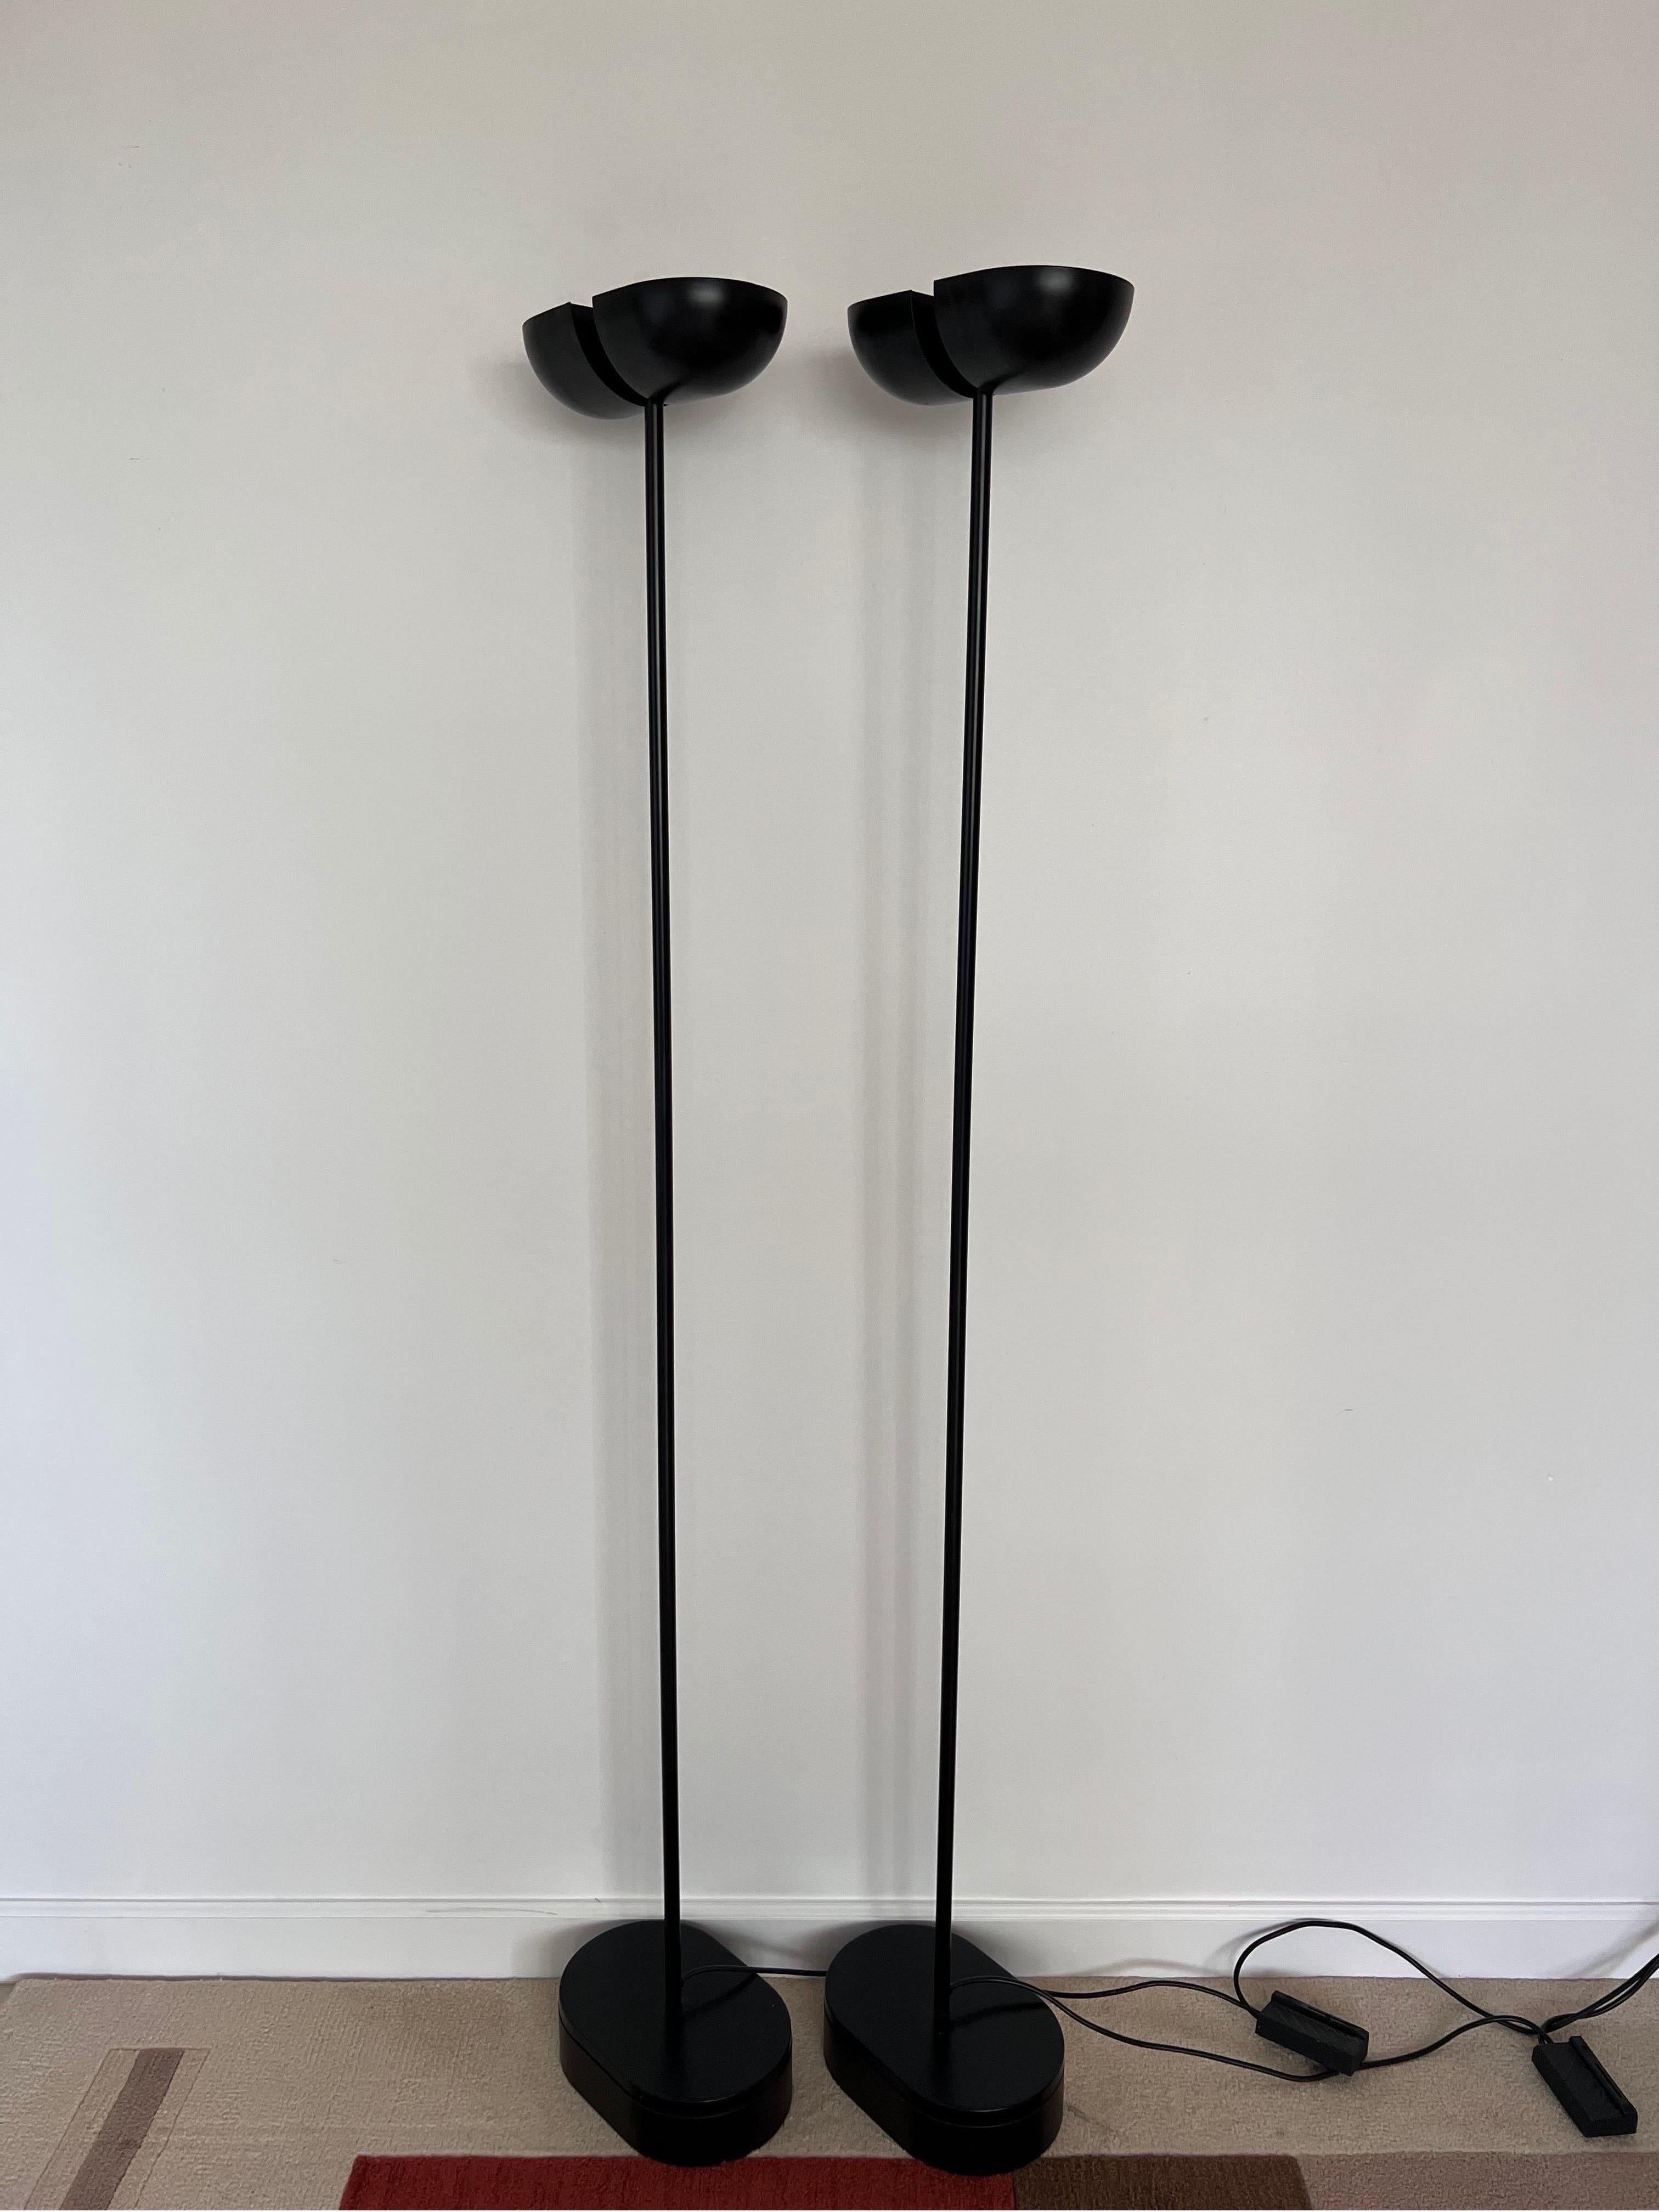 Post-Modern Postmodern Black Torchiere Floor Lamps with Adjustable Heads, 1980s, a Pair